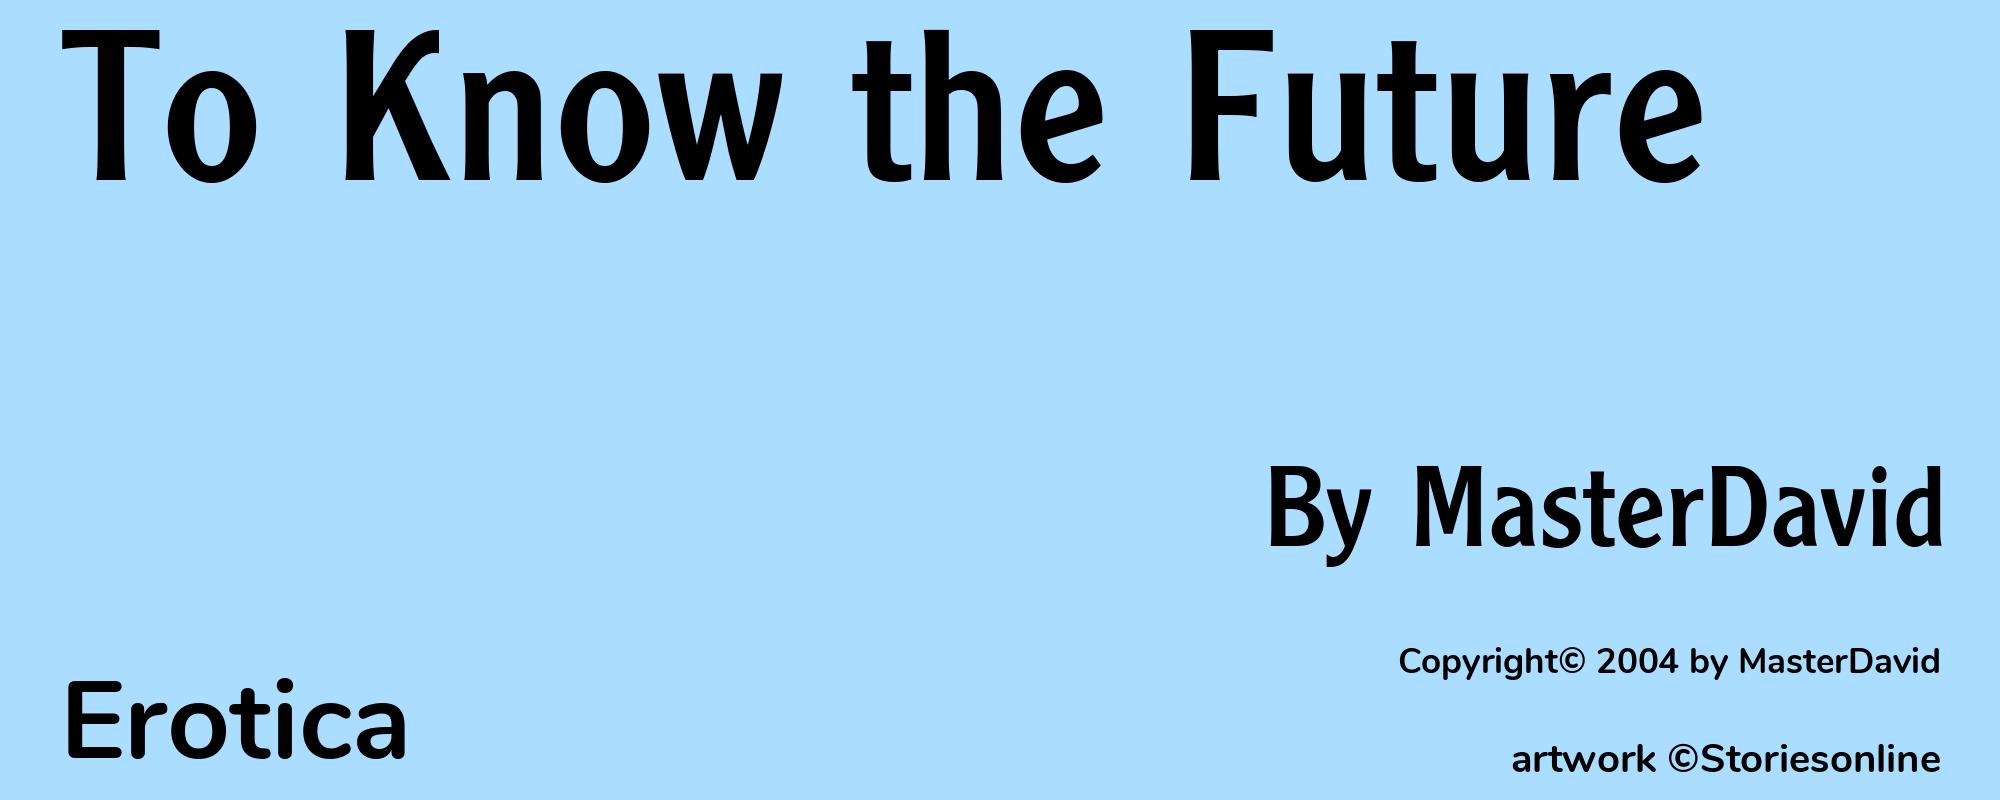 To Know the Future - Cover